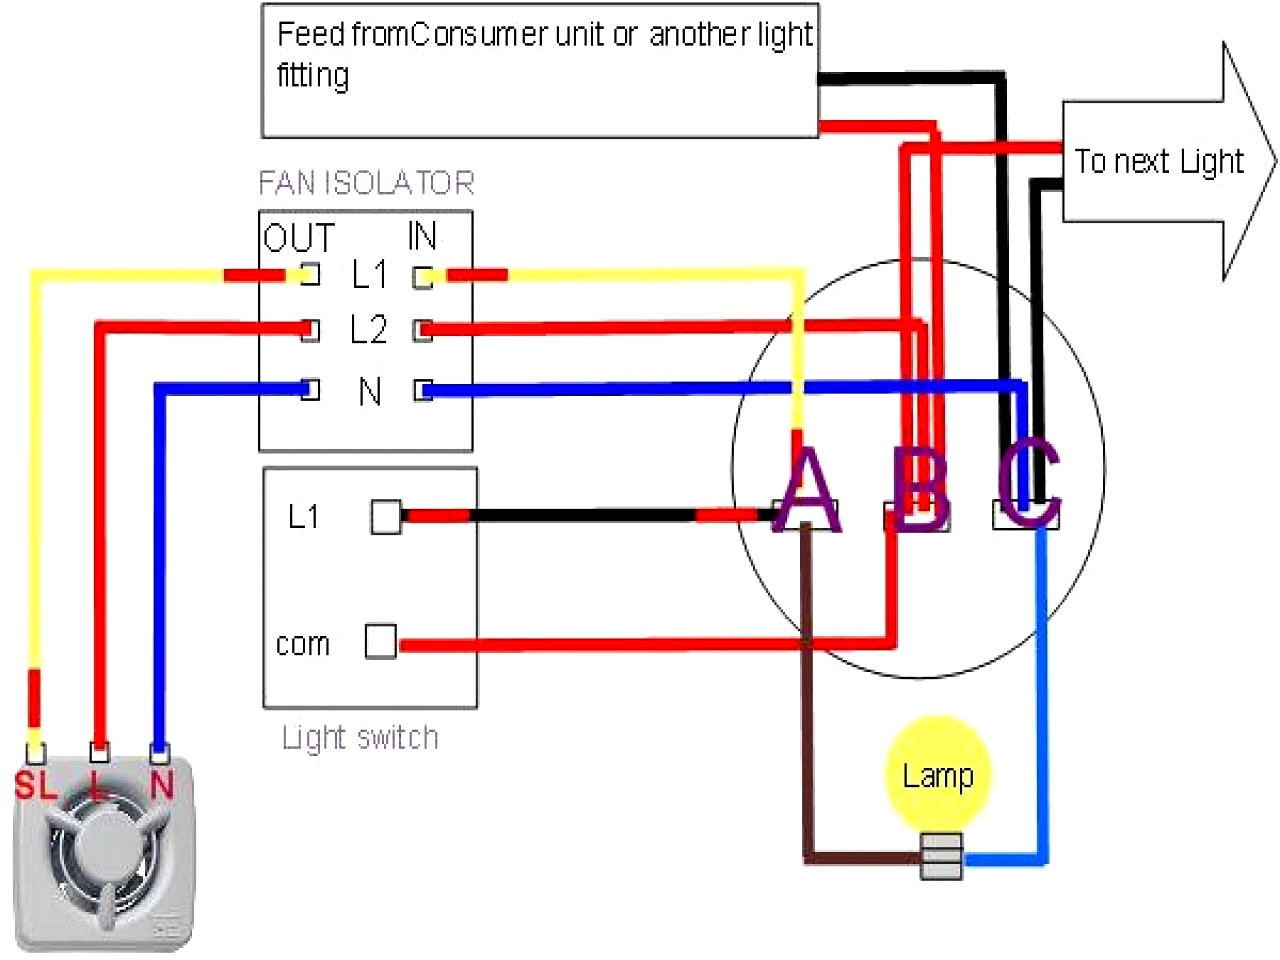 Ceiling Fan Pull Chain Light Switch Wiring Diagram Wiring For New Ceiling Fan Light Switch Electrical Diy Chatroom